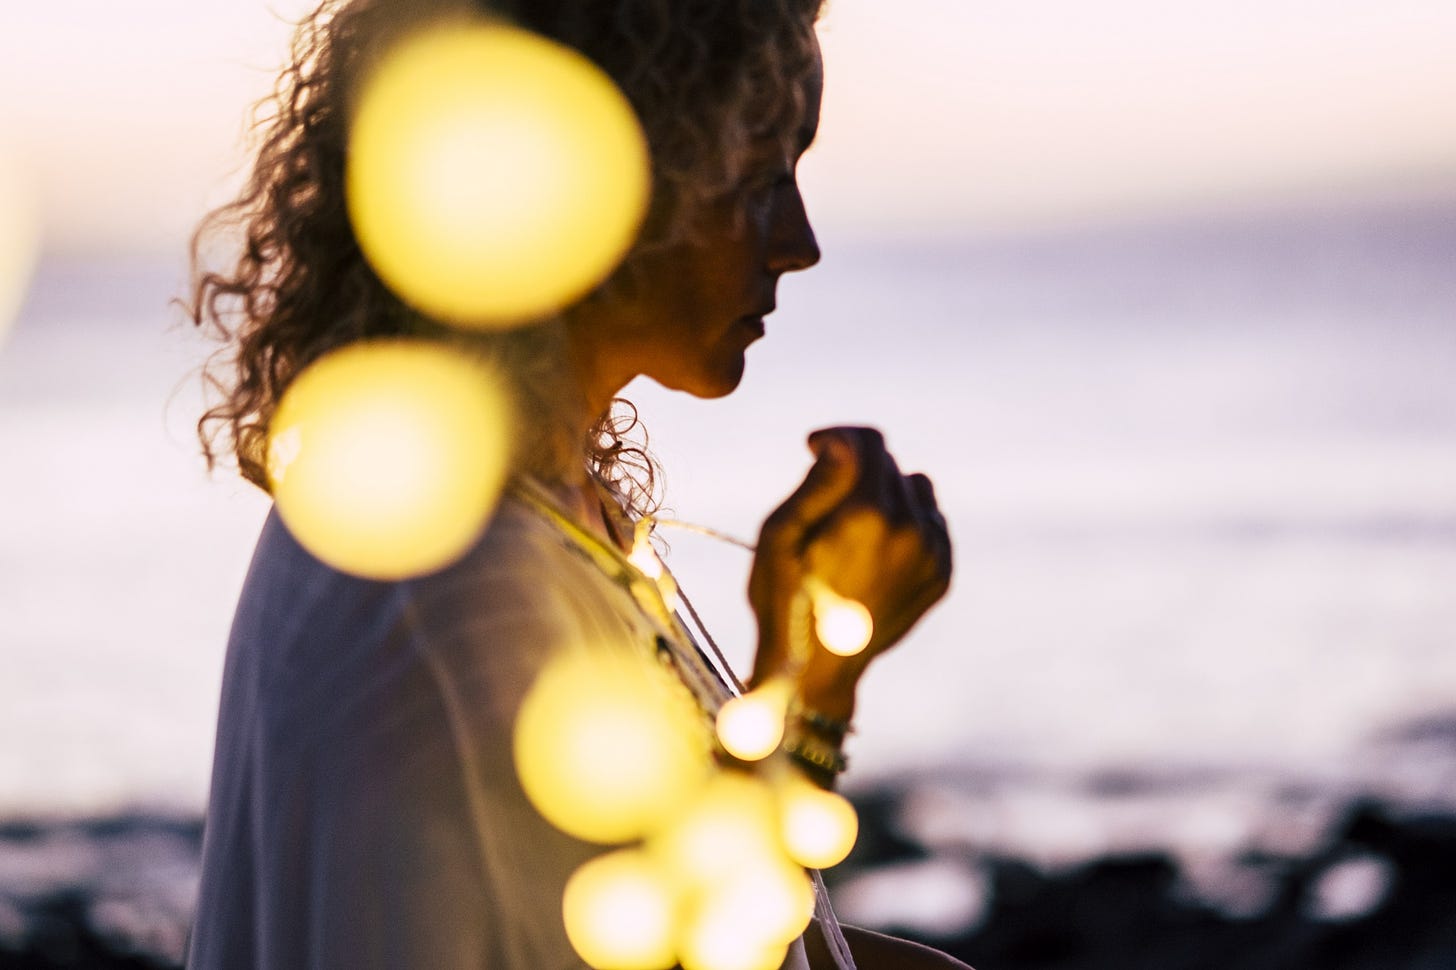 A woman, who is just out of focus, clutches a string of lights on a twilight beach.